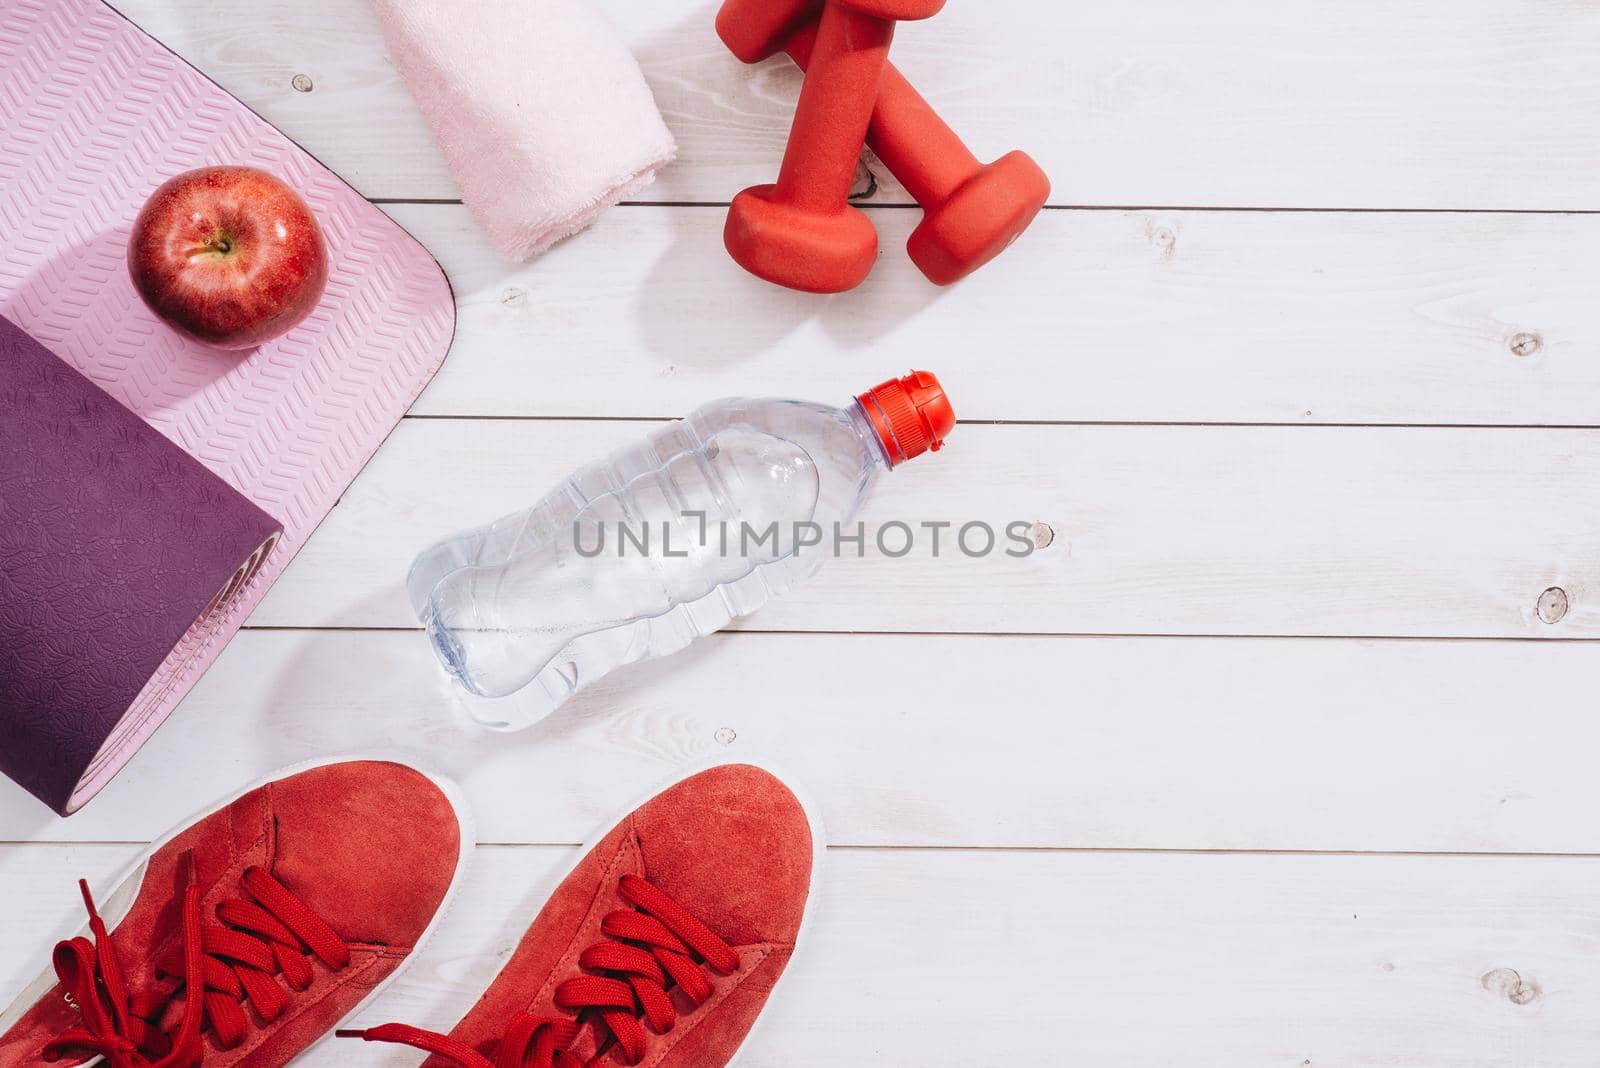 Fitness, healthy and active lifestyles Concept, dumbbells, sport shoes, bottle of waters and apple on wood background - Image